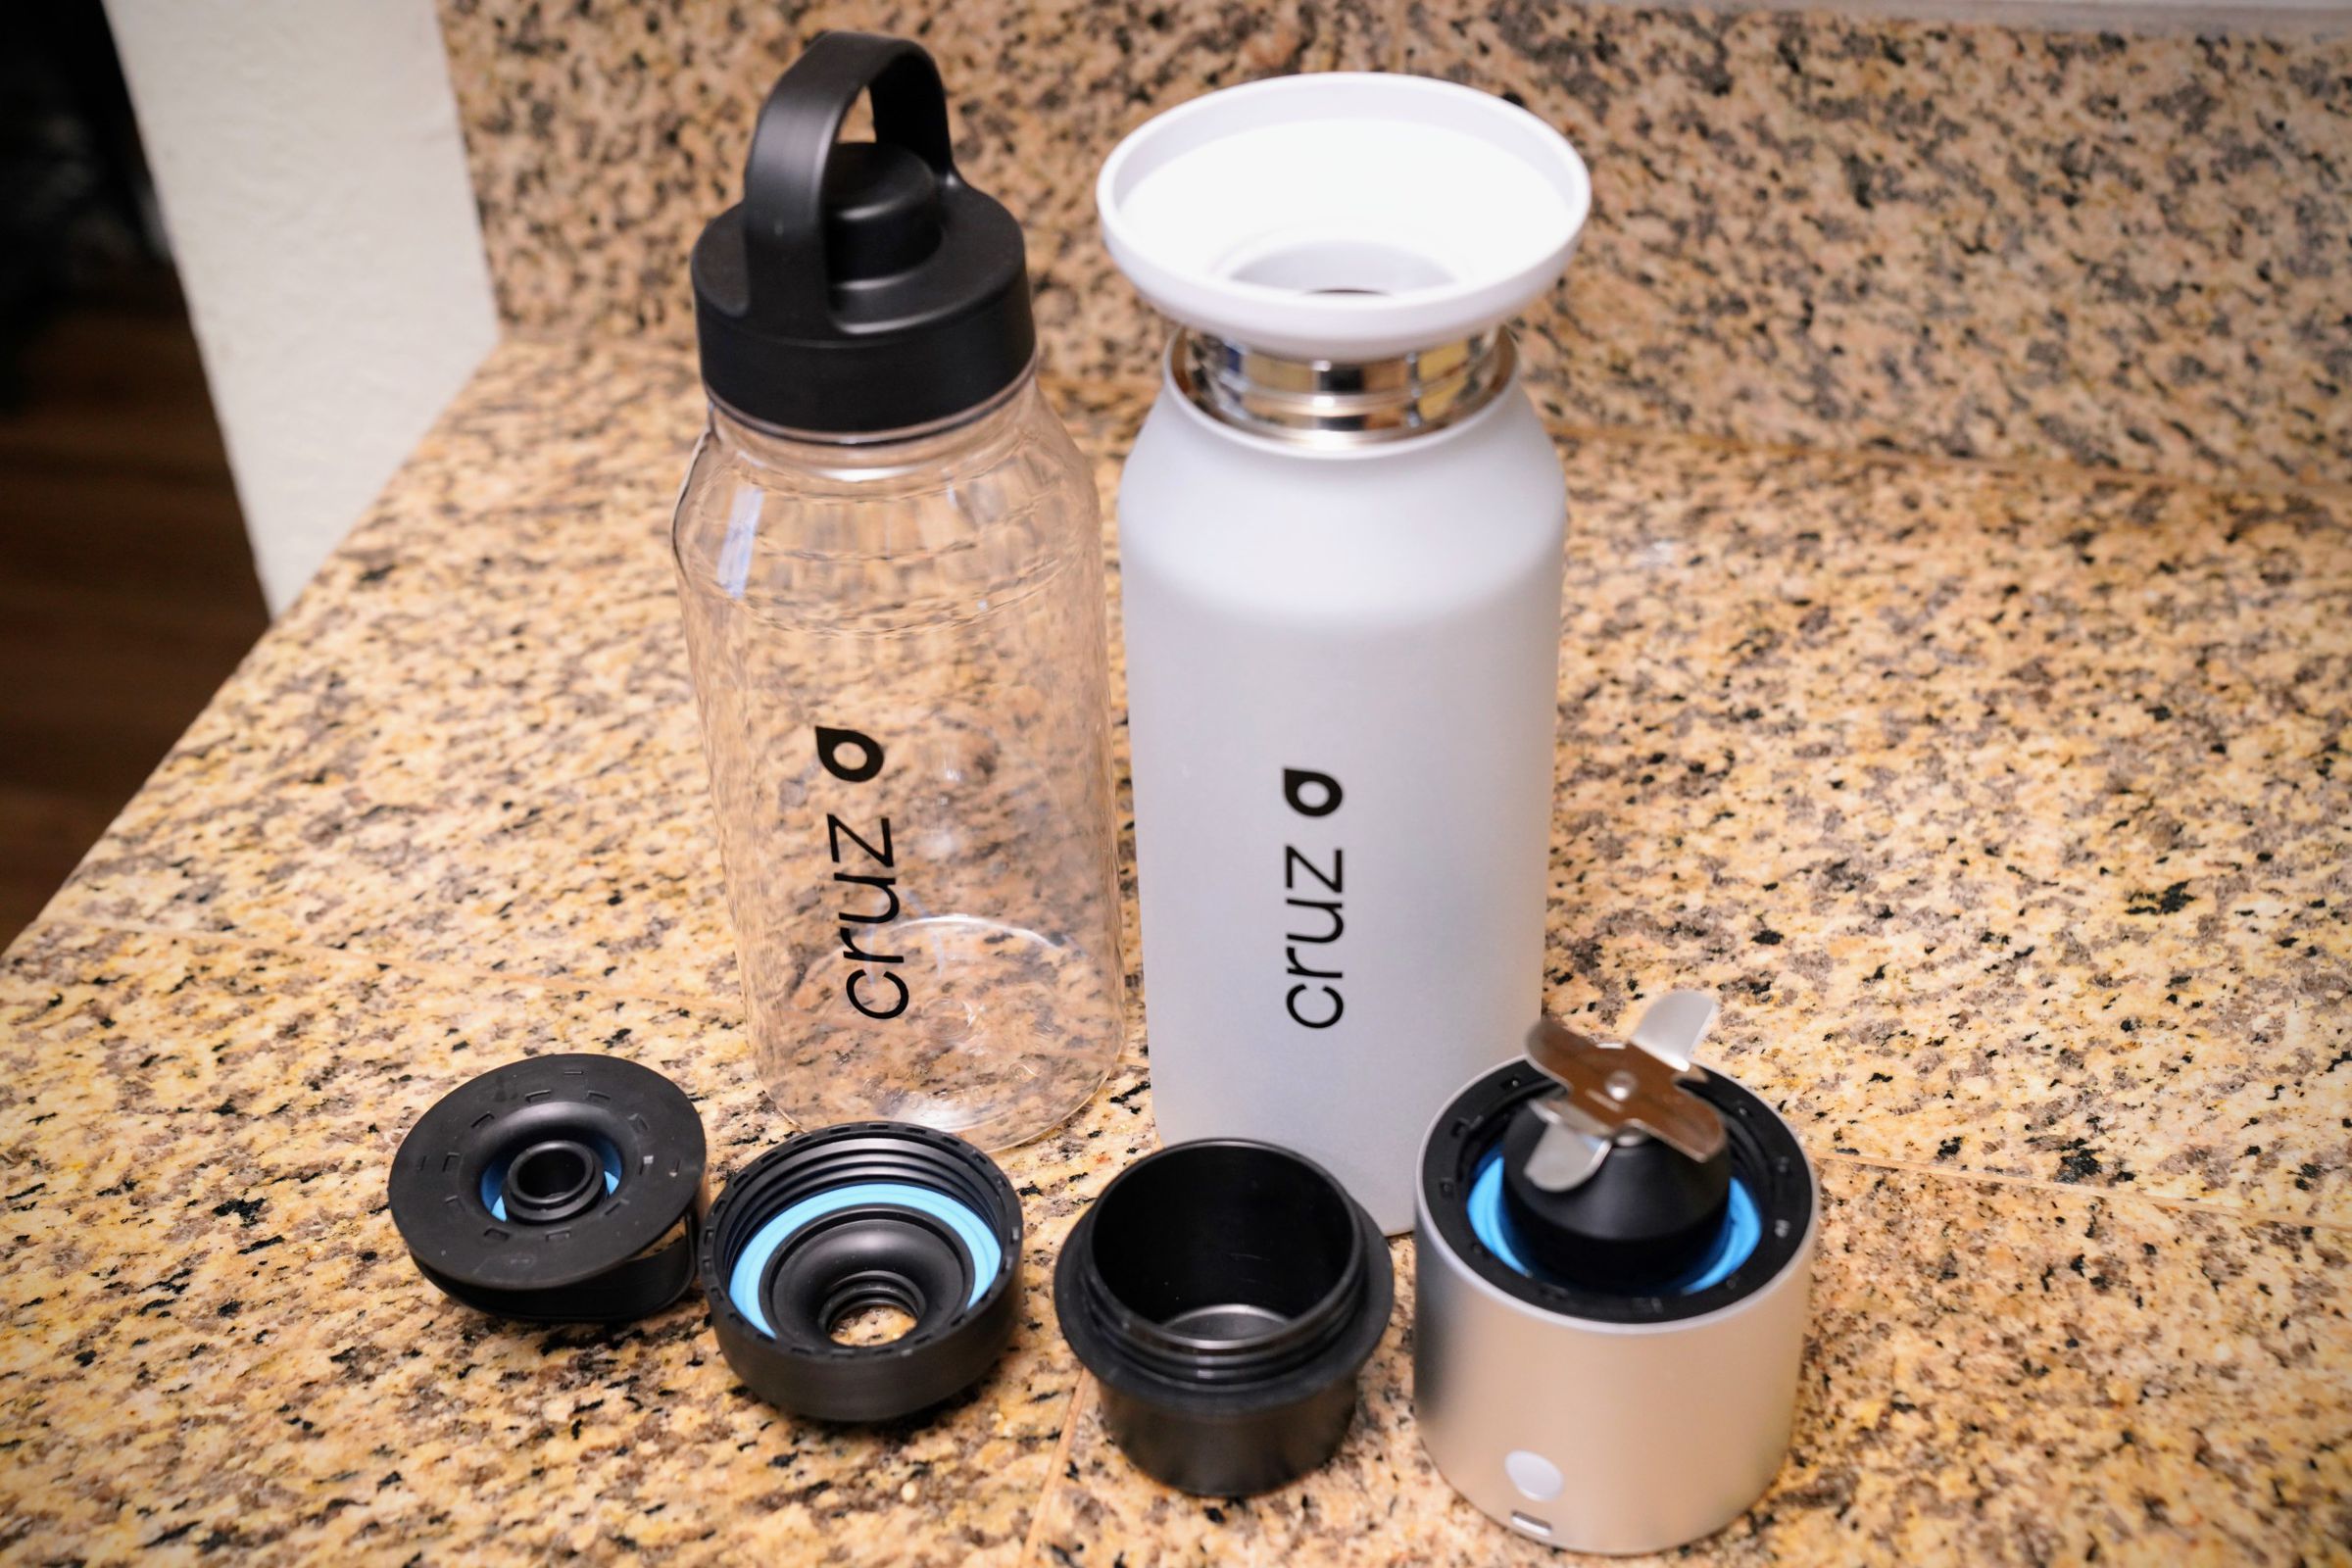 Everything that comes with the BlenderCap, for now (the clear bottle is a limited-time bonus). The tallest black plastic object is a blender cap for the BlenderCap itself. 